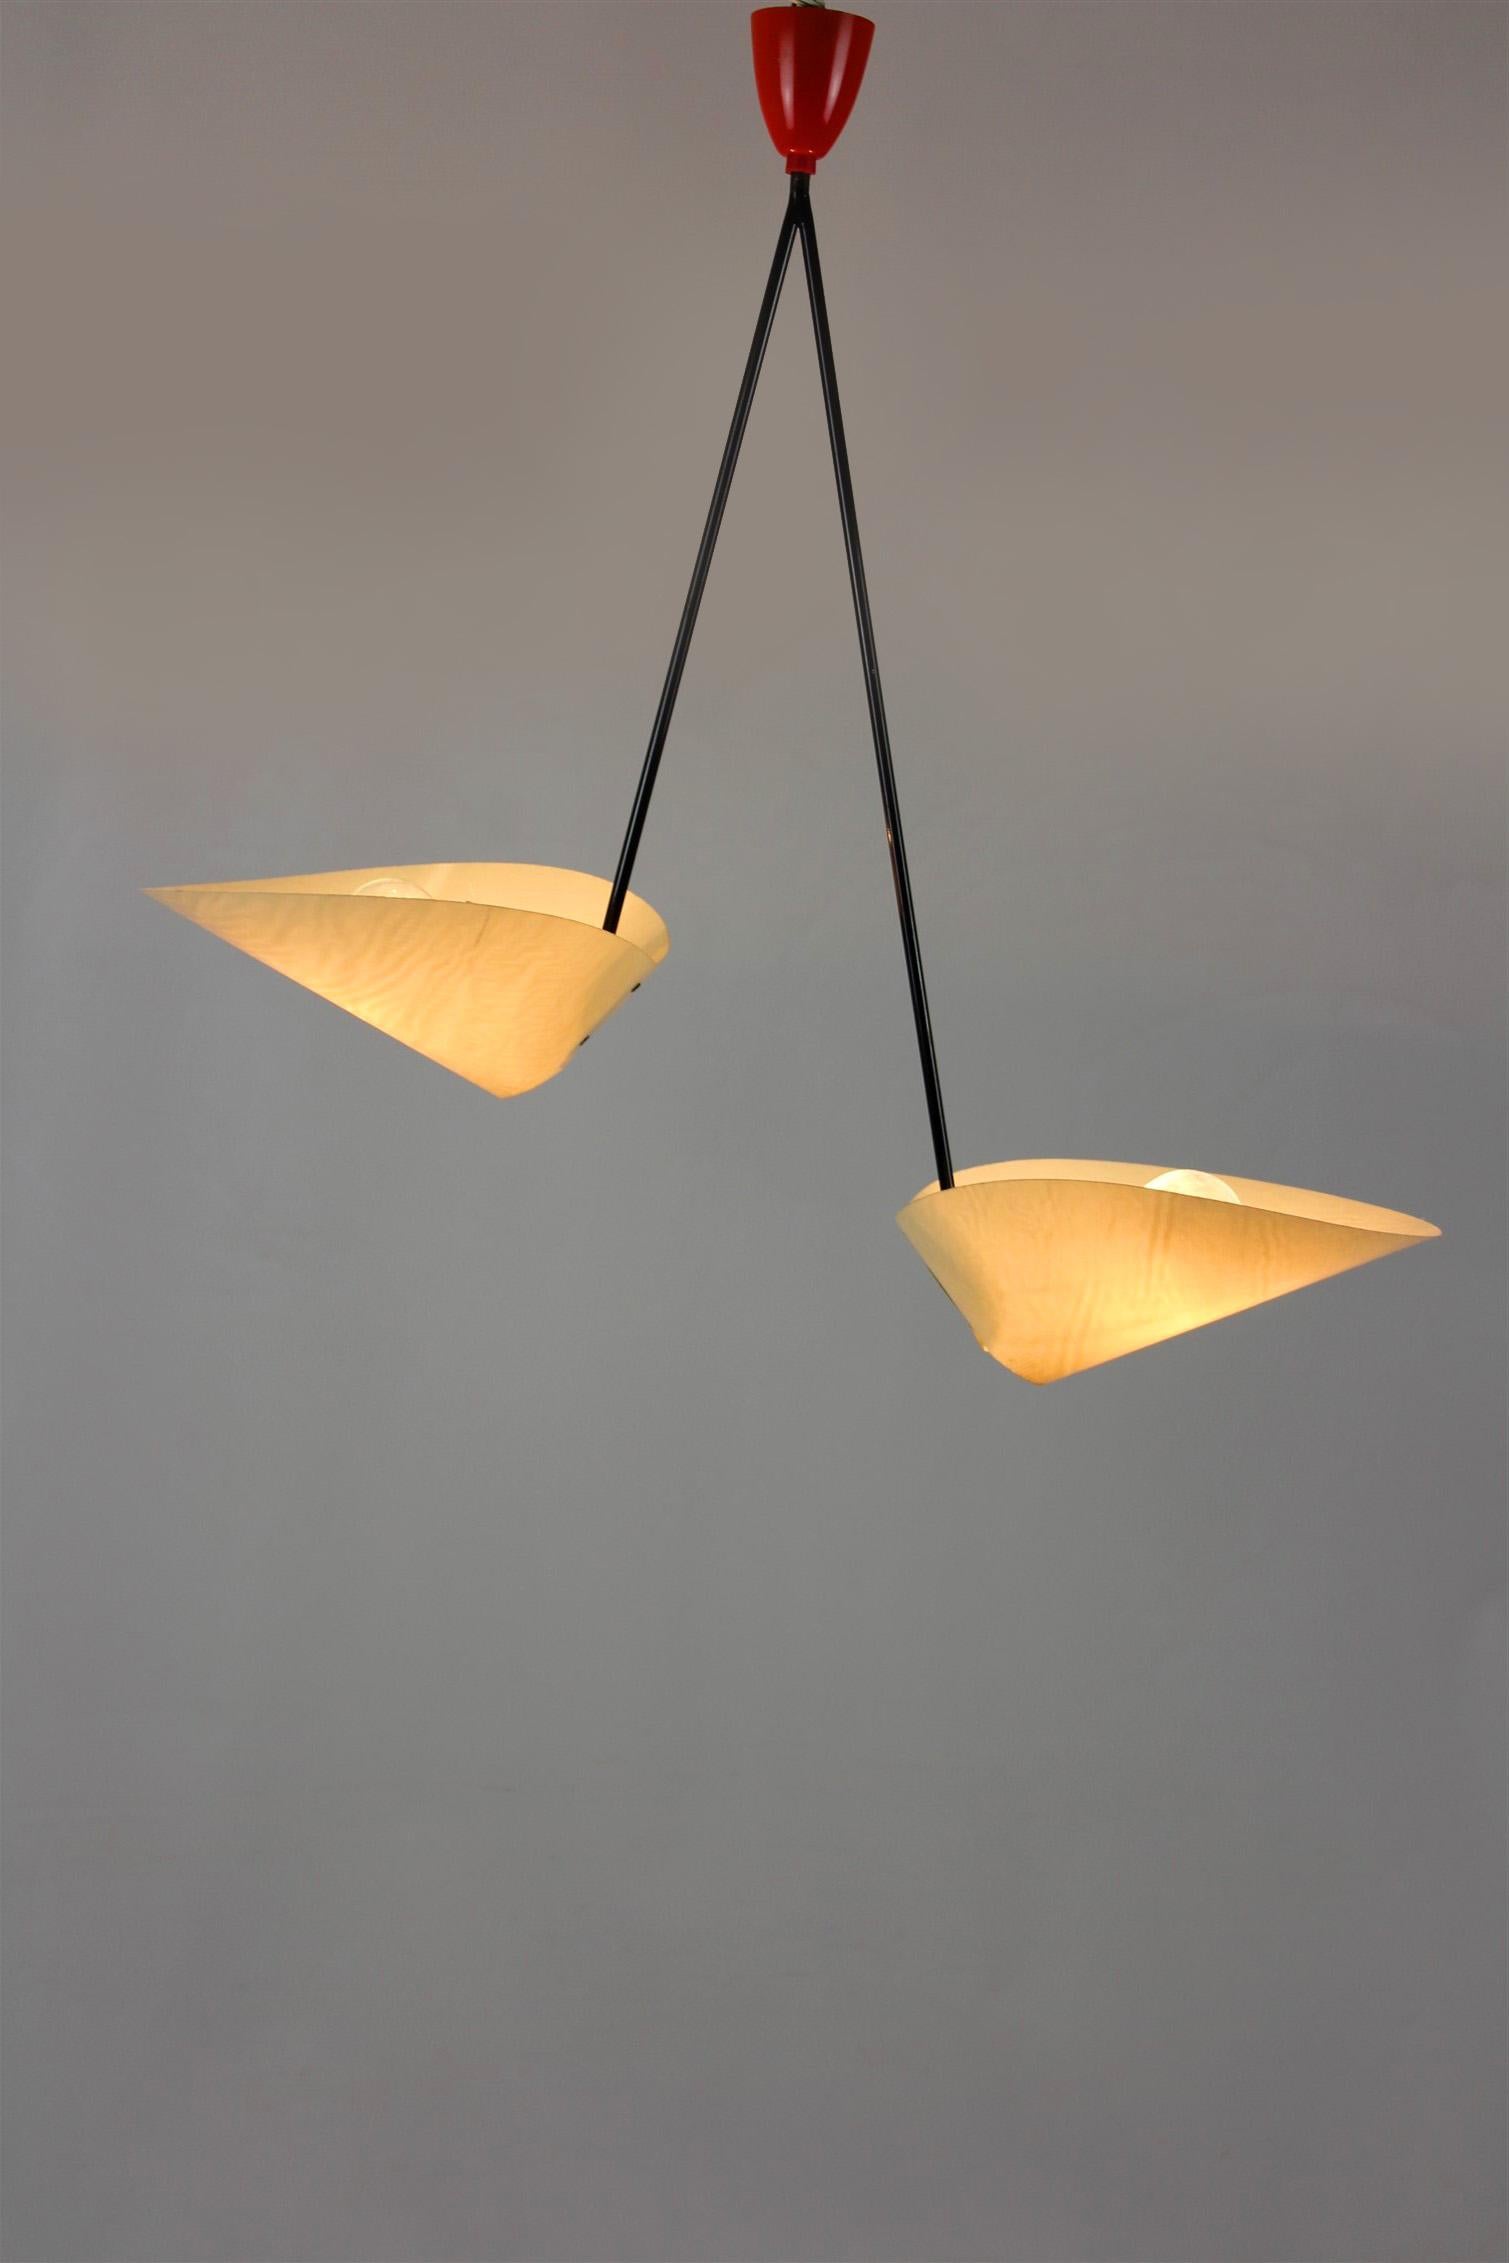 Mid-Century Modern Czech ceiling lamp from the 1960s. Model 1210 designed by Josef Hurka for Napako. Features two fiberglass lampshades, works with E27 bulbs.